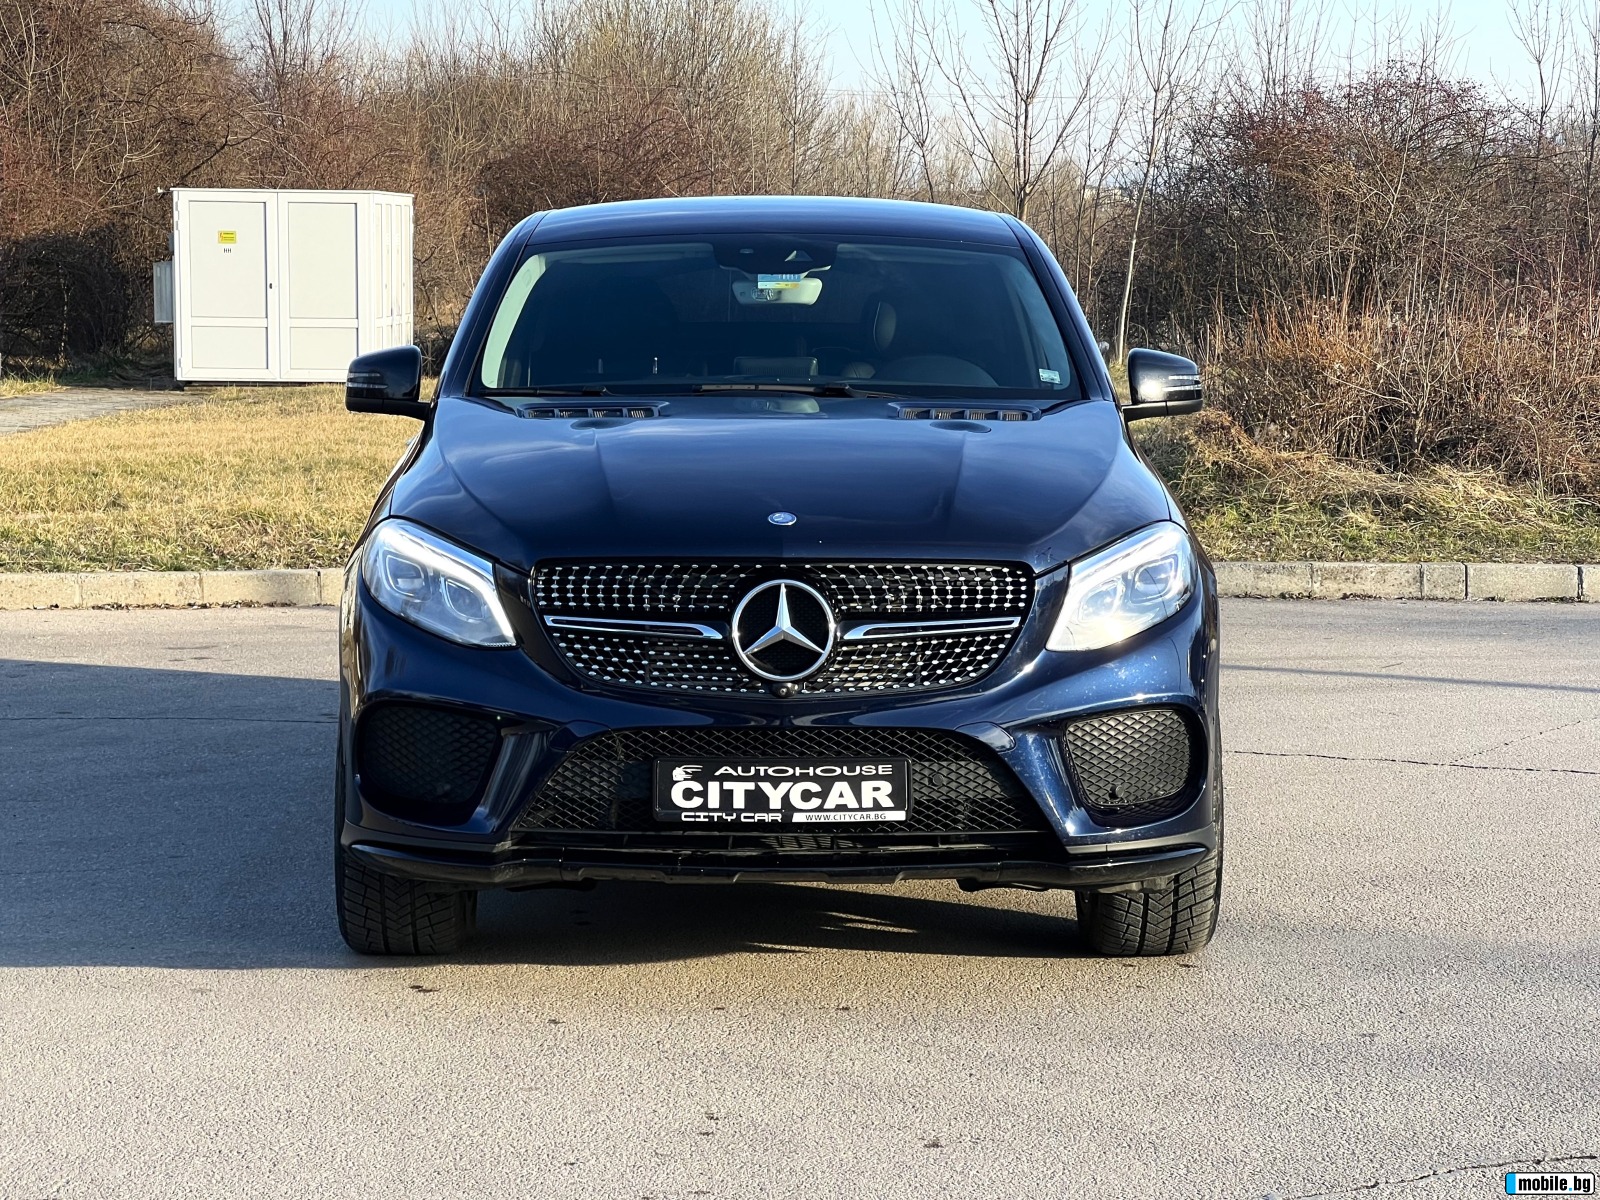 Mercedes-Benz GLE 350 d/ AMG/ COUPE/ 4MATIC/ NIGHT/AIRMATIC/360 CAM/ 21/ | Mobile.bg   2